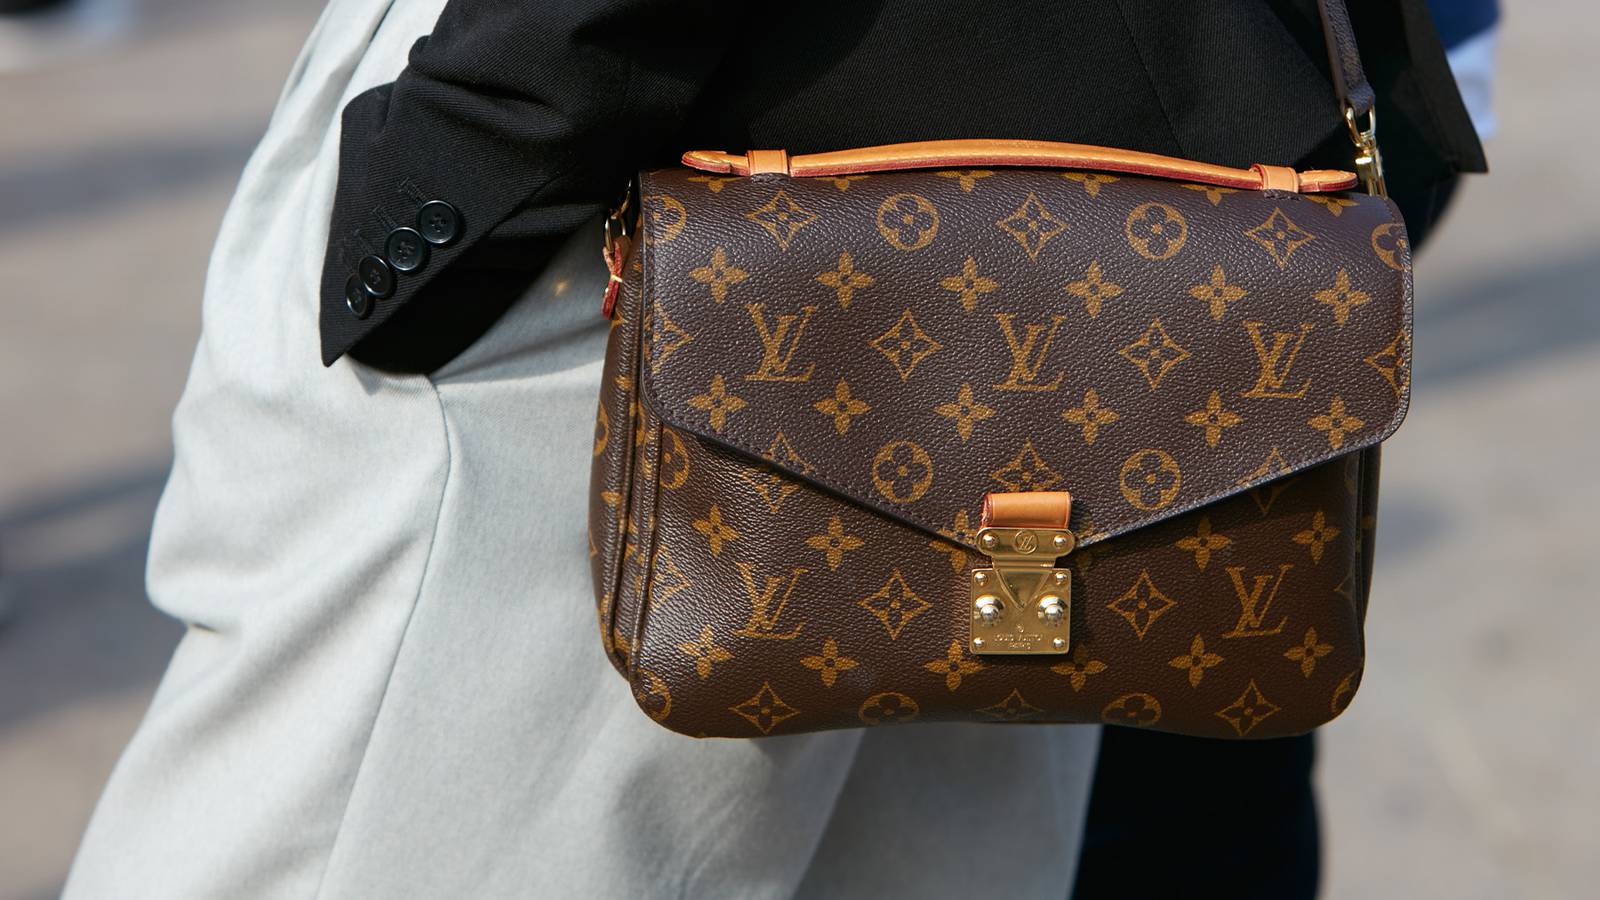 LVMH Hit a Market Valuation of 400 Billion Euros and its ATH. Is